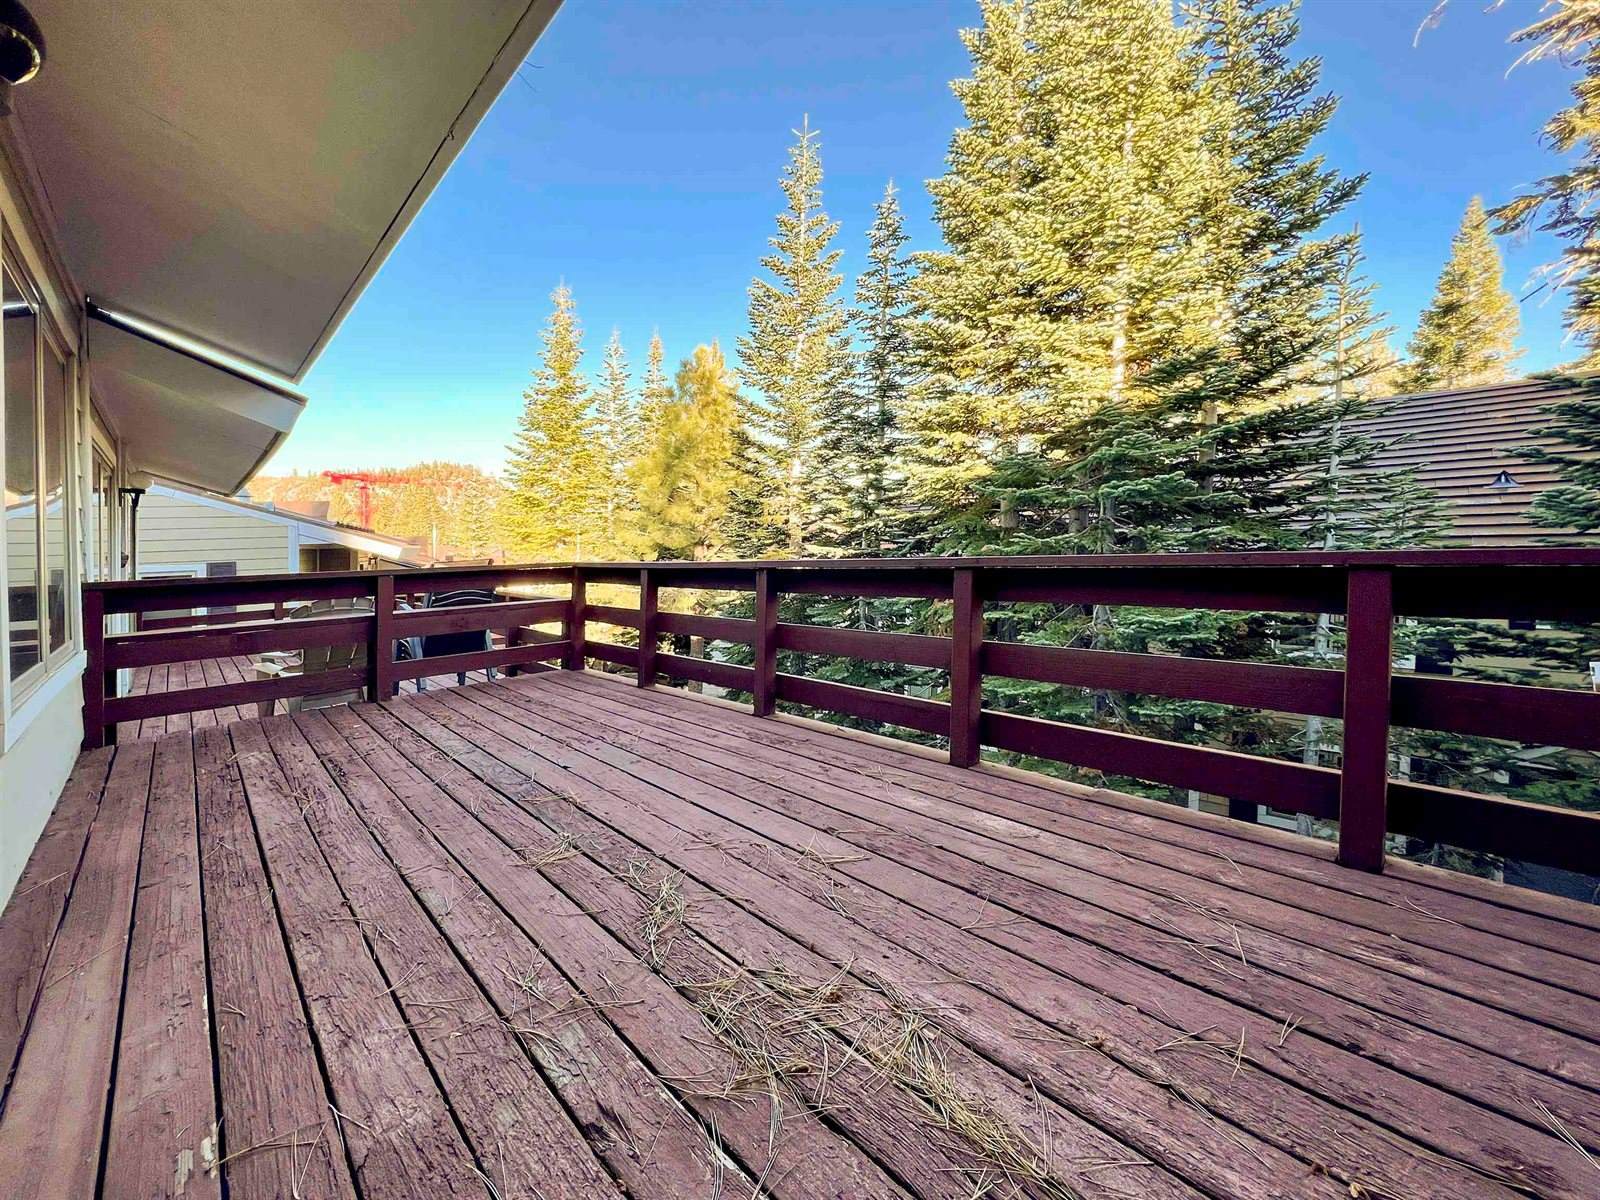 201 Lakeview Blvd. #6, Mammoth Lakes, CA 93546